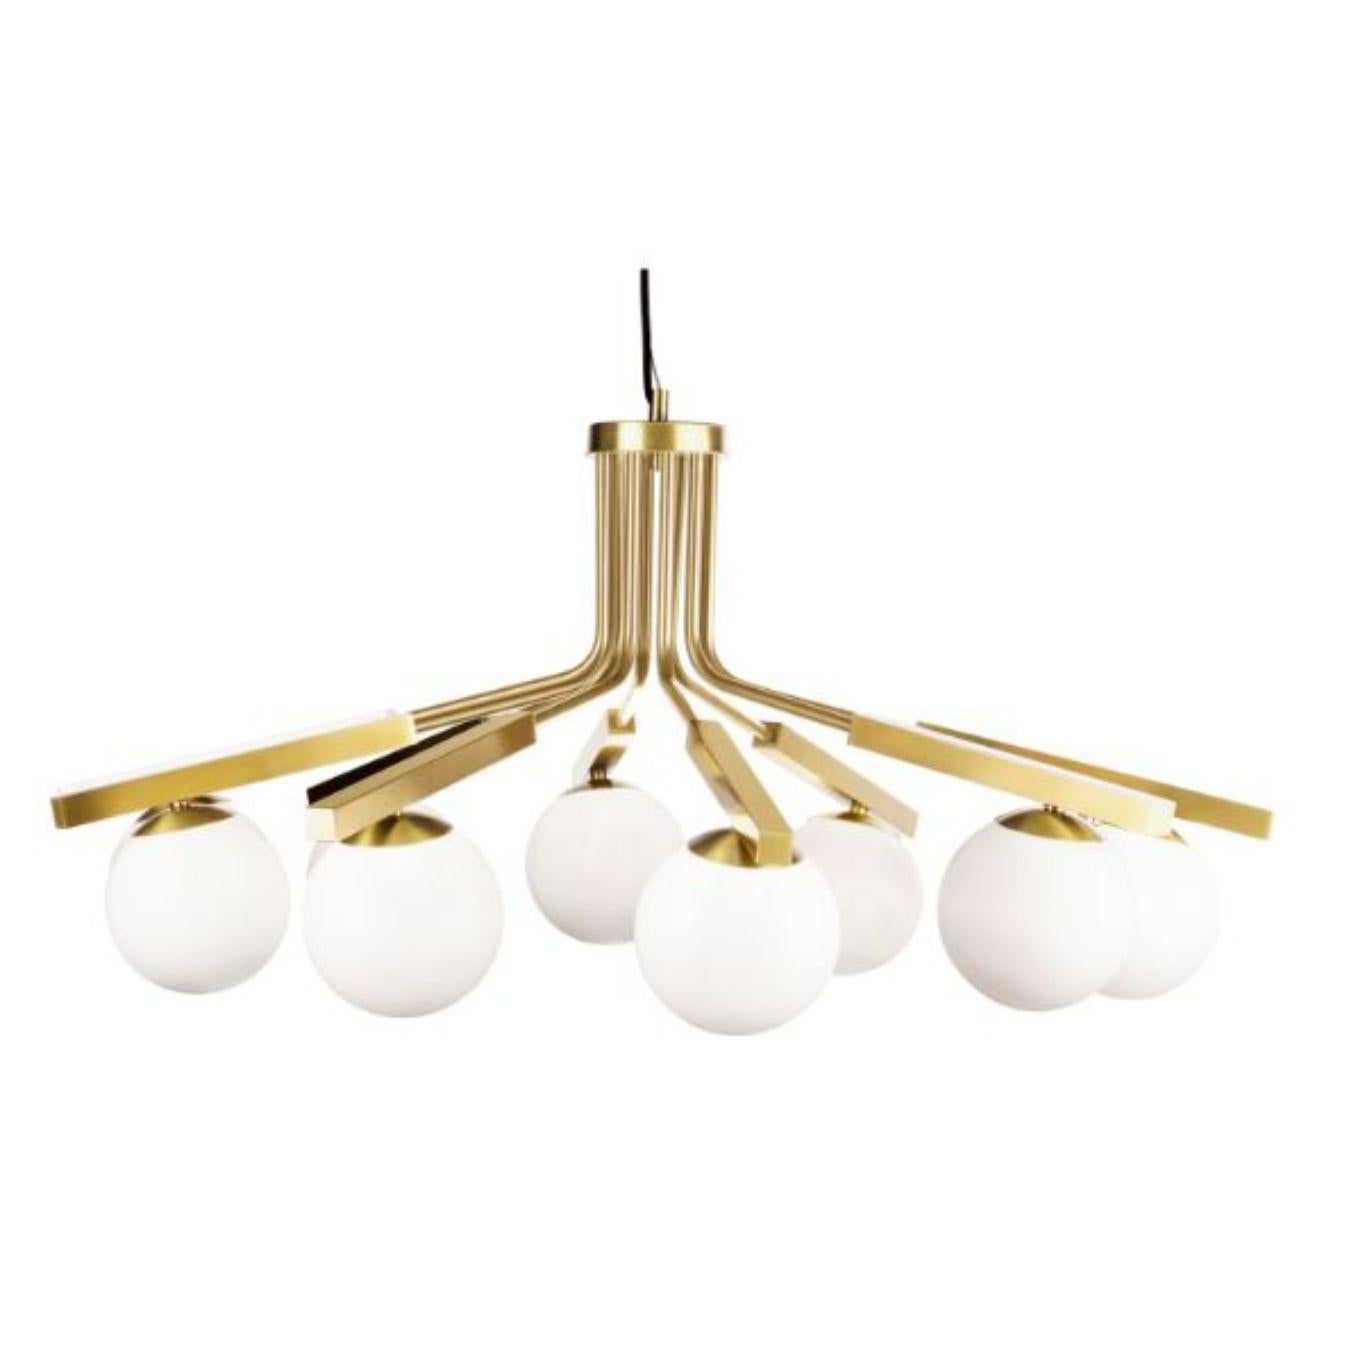 Brass Globe Suspension lamp by Dooq
Dimensions: W 100 x D 100 x H 50 cm
Materials: lacquered metal, polished or brushed metal, brass.
Also available in different colors and materials. 

Information:
230V/50Hz
10 x max. G9
4W